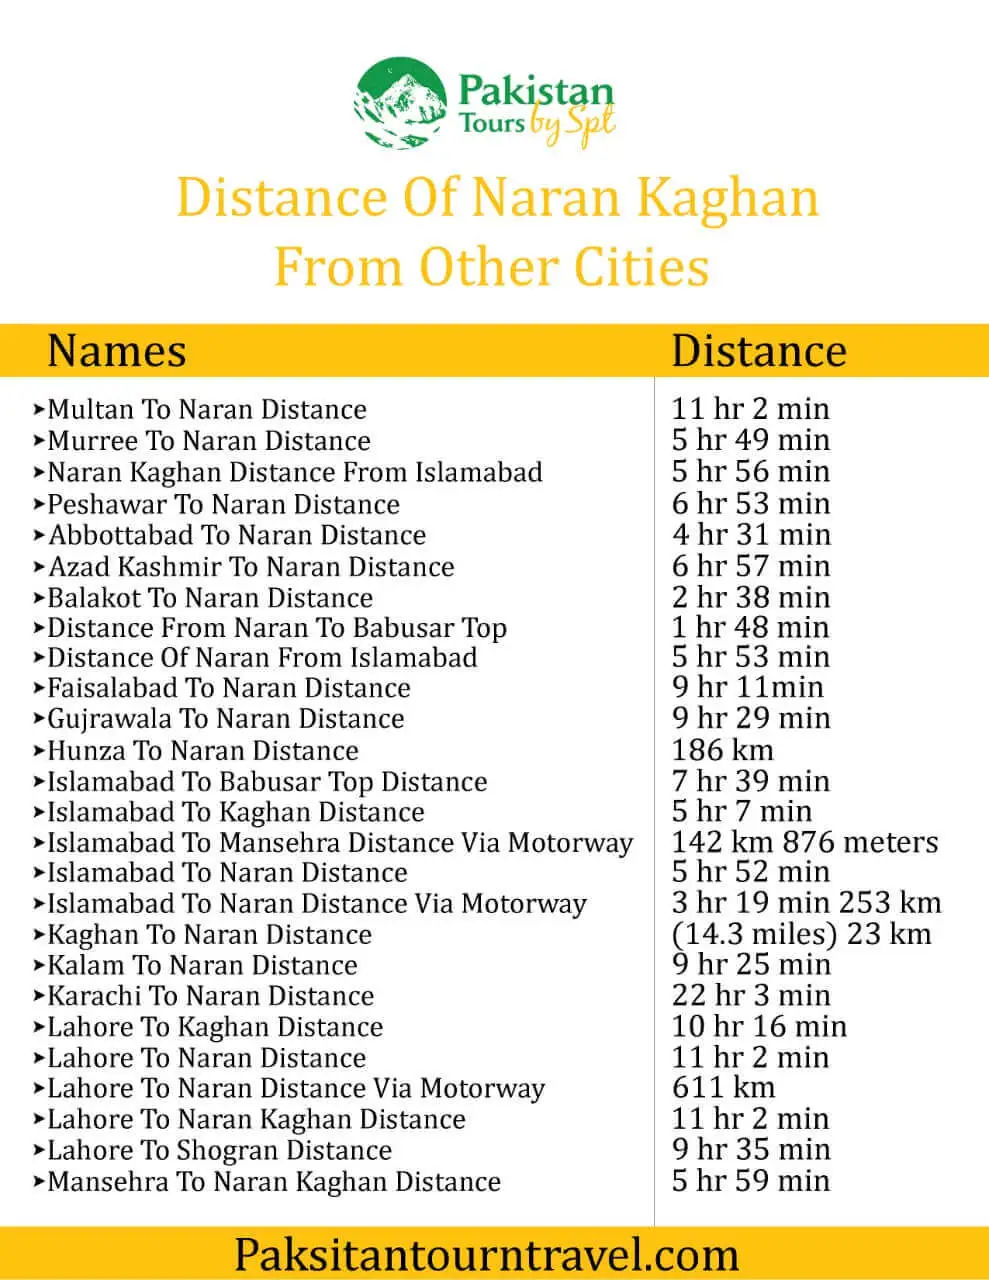 How much distance of Naran city from other major cities of Pakistan? Famous city to depart for naran are Islamabad, Lahore and Karachi.